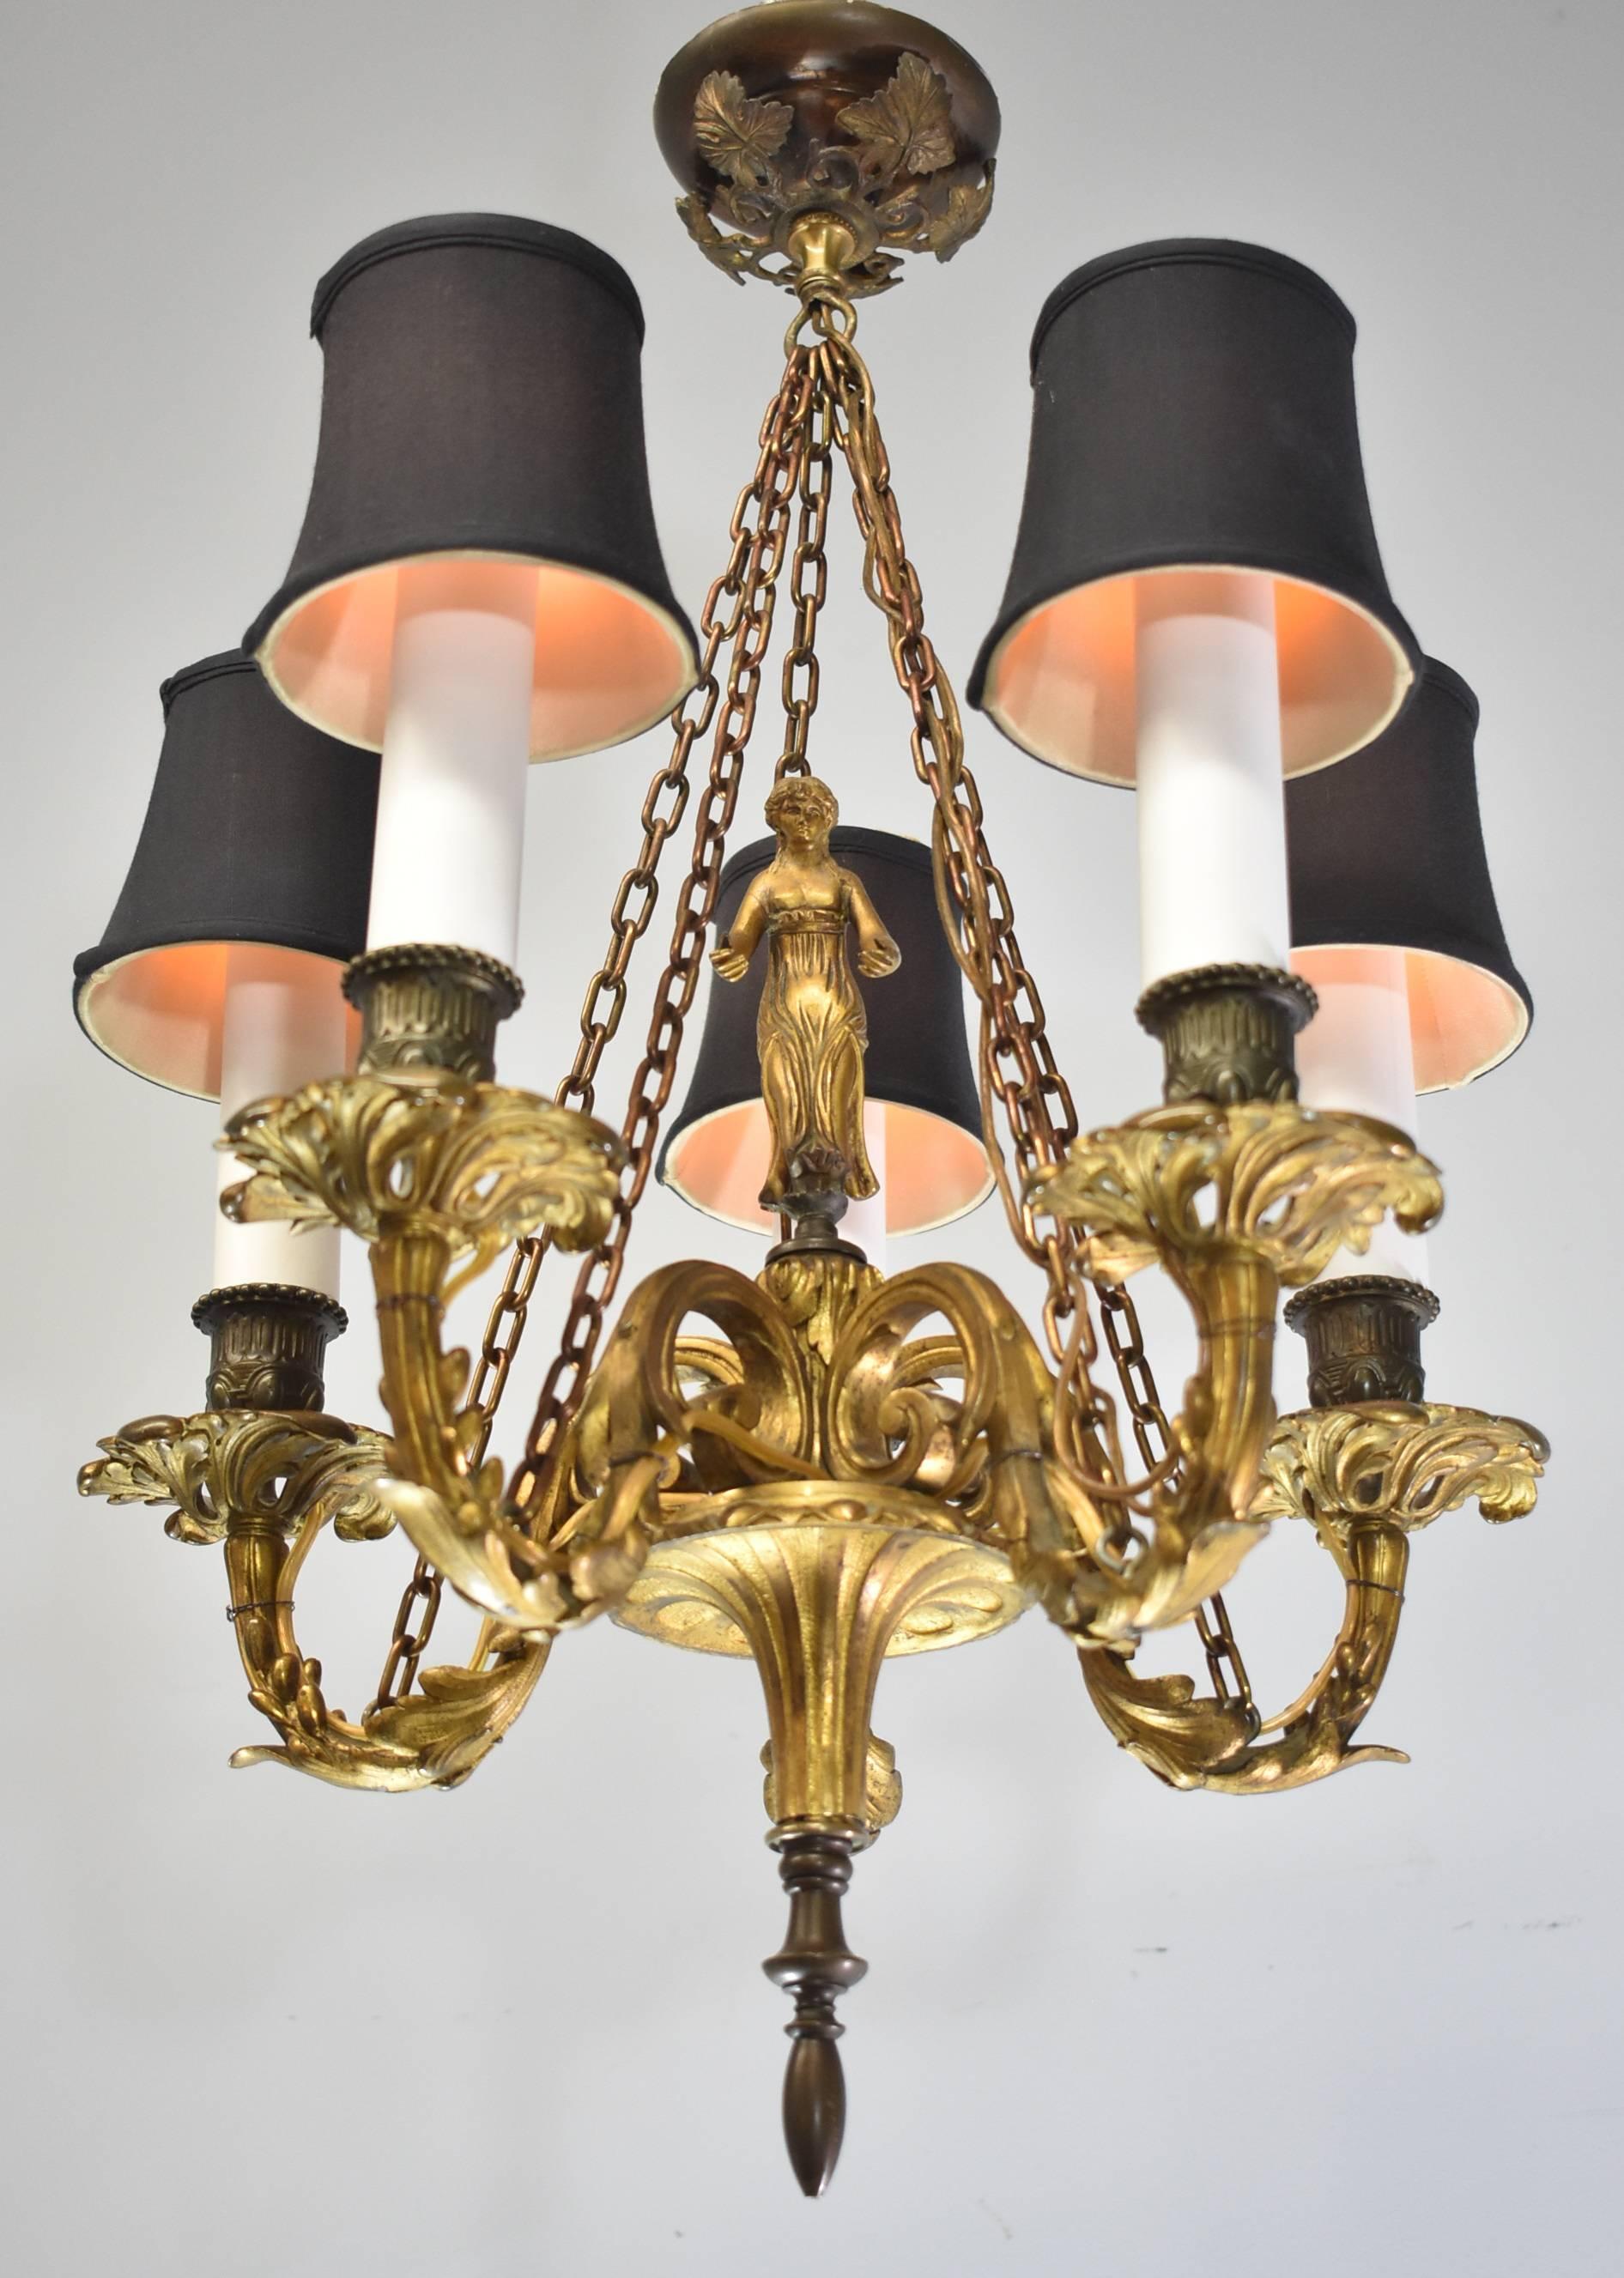 A stunning French bronze chandelier. This beautiful five-light fixture features a central female figure with flowing hair and gown, 5 arms with floriage detail and foliage detail adorns the ceiling cap as well. Very good condition with a nice